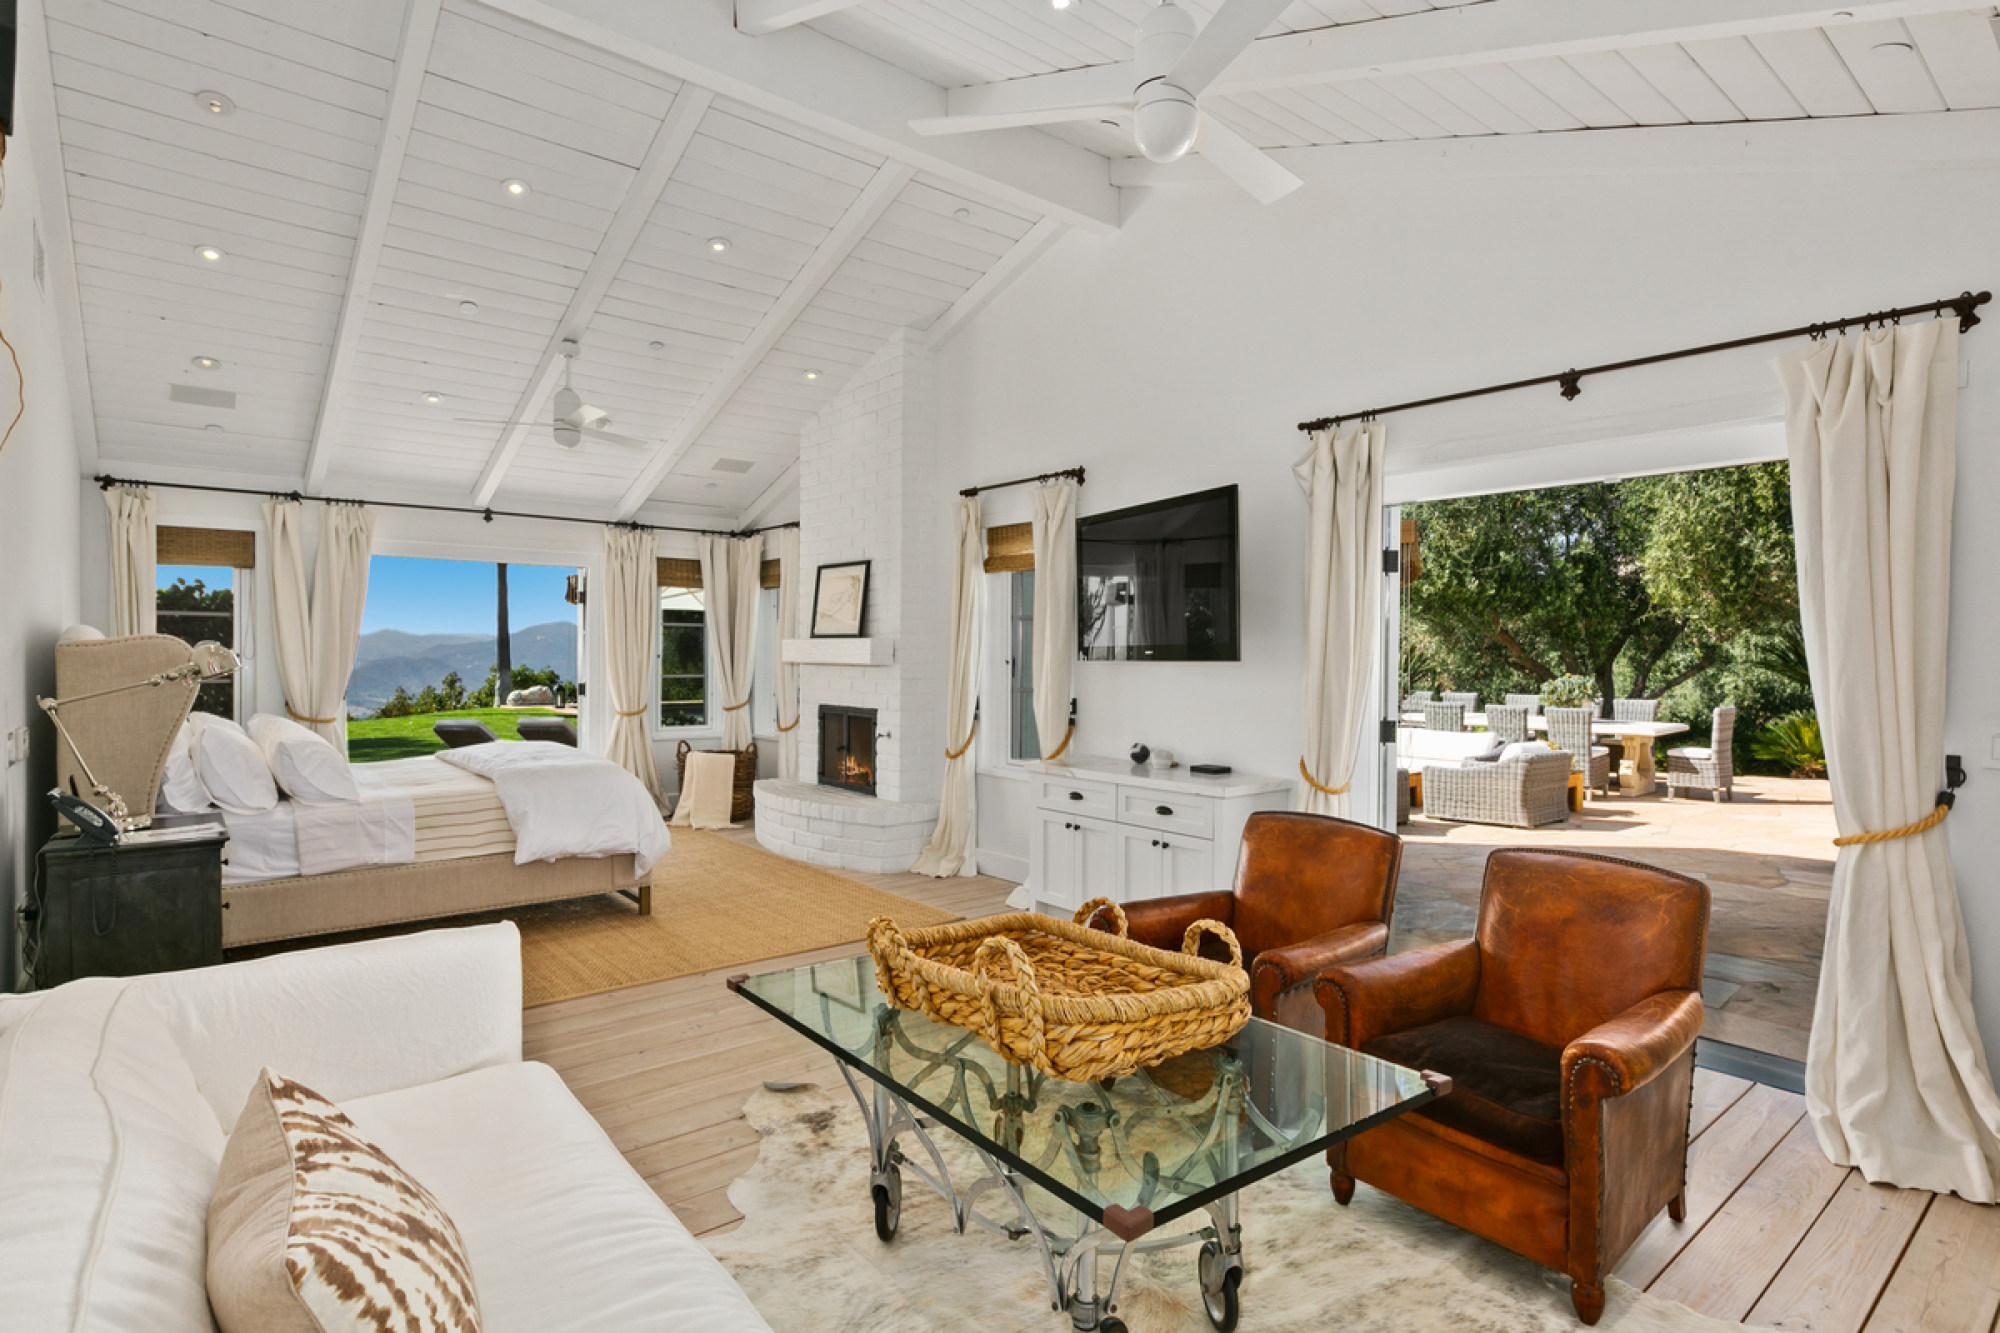 The primary suite of Sandra Bullock’s compound comes with its own fireplace, lounge area and direct access to the pool. Photo: ZenHouse Collective